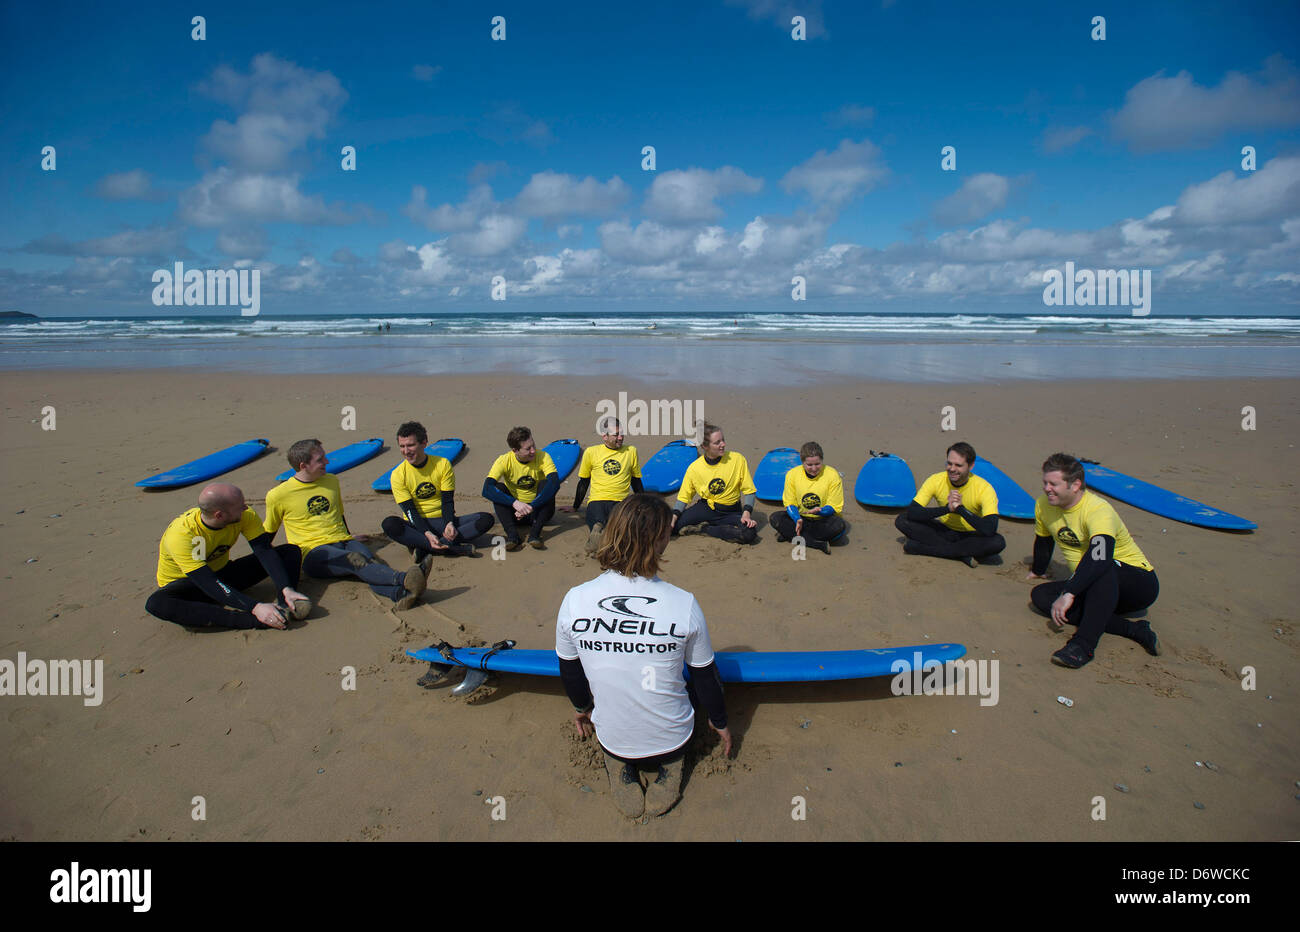 Students during a surf lesson on the beach at Watergate Bay, Cornwall, UK Stock Photo